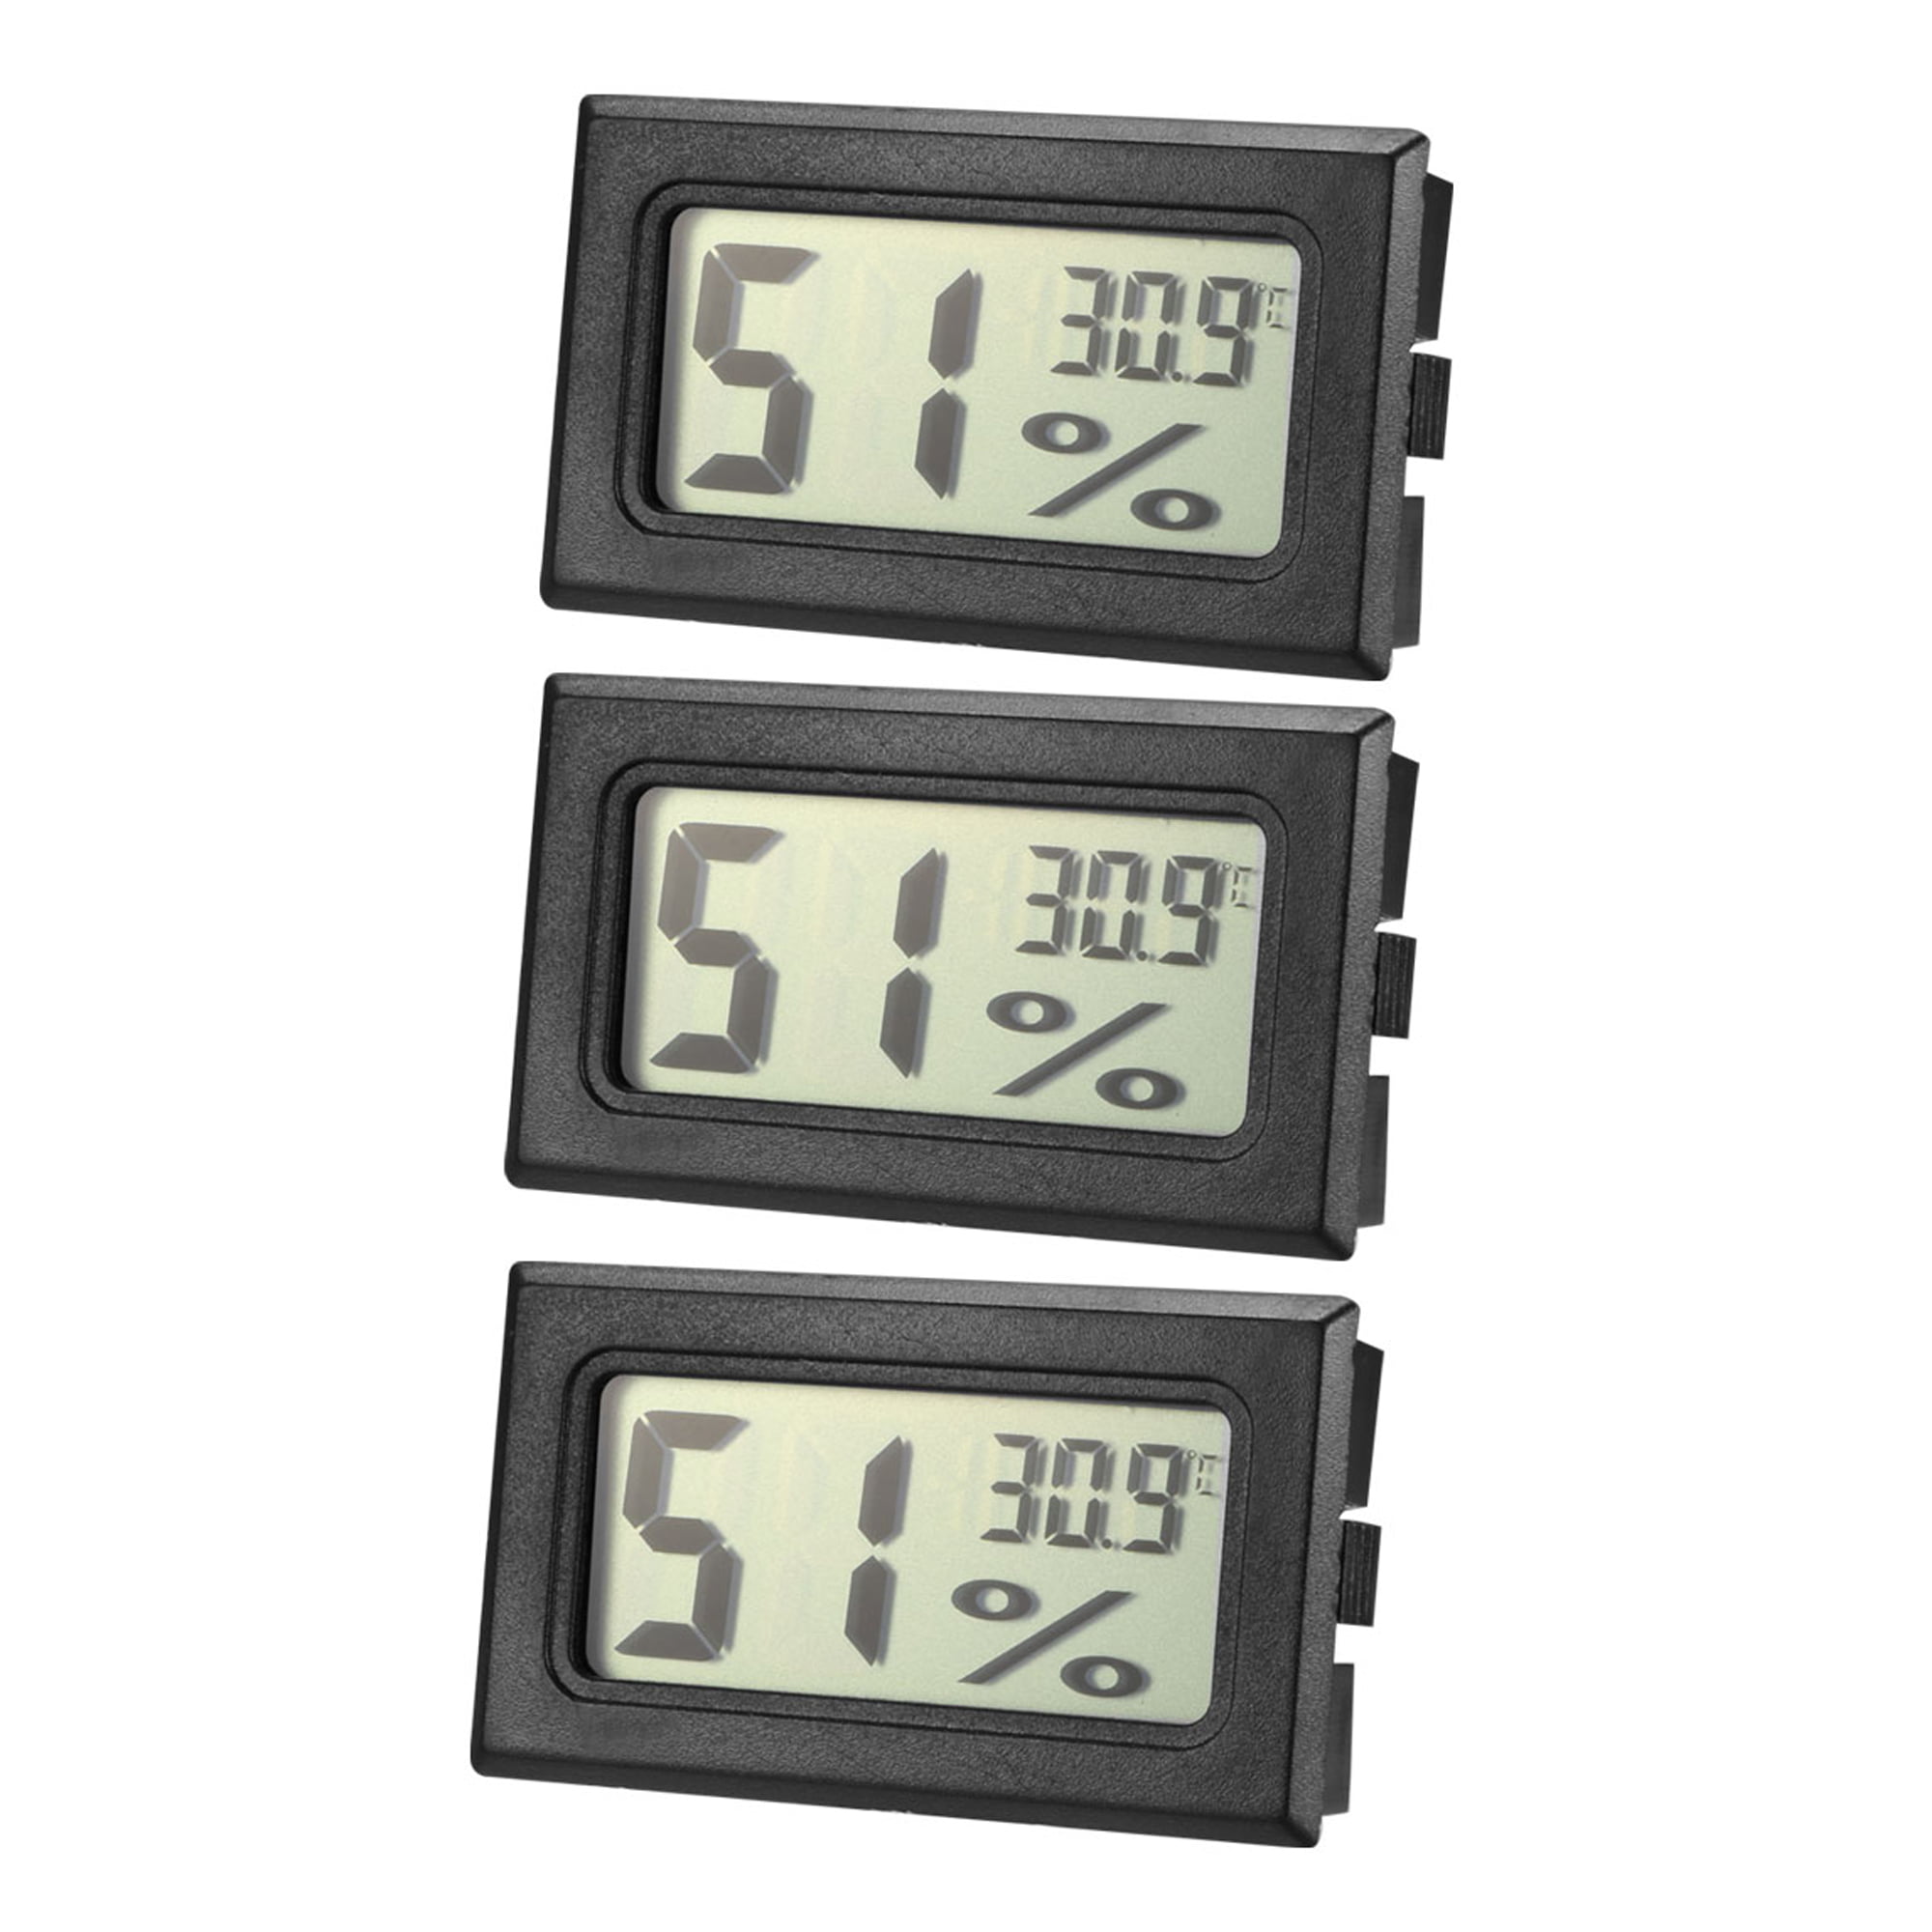 Details about   Thermometer Temperature Mini LCD Meter Gauge Hygrometer Humidity Celsius Digital 